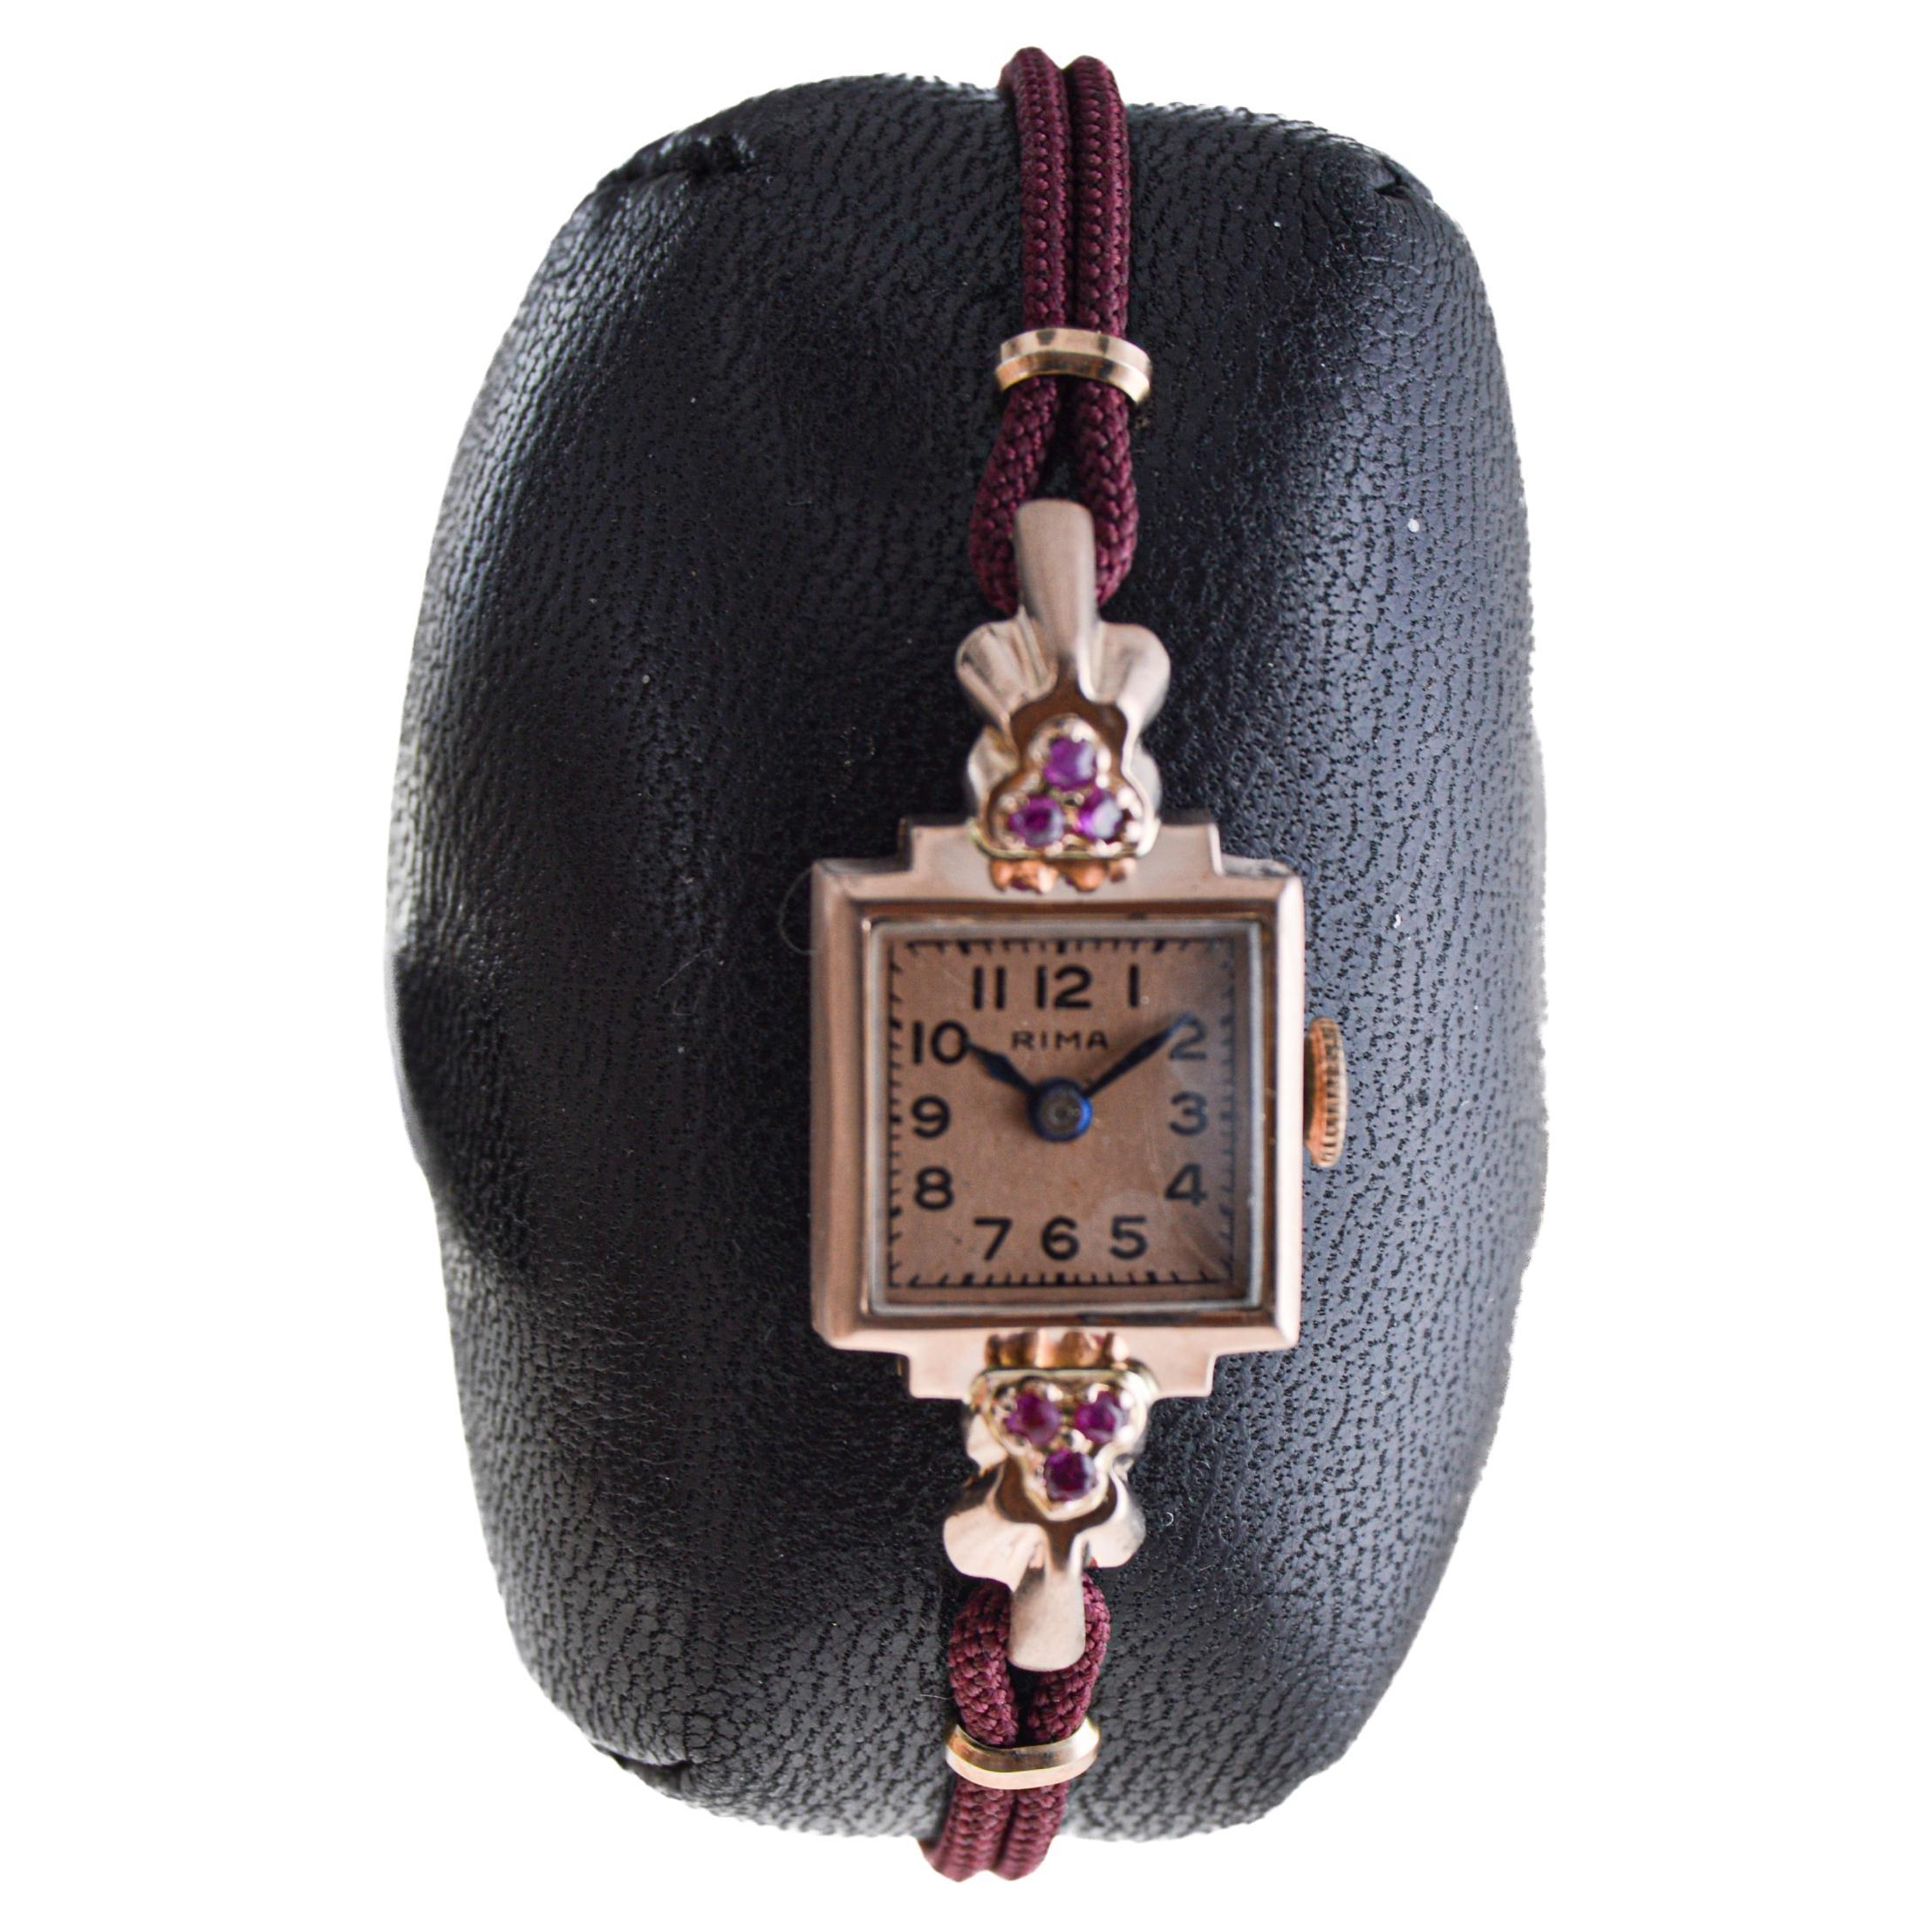 Rima Ladies 14Kt Solid Rose Gold Art Deco Ladies Watch with Ruby Accents 1940's For Sale